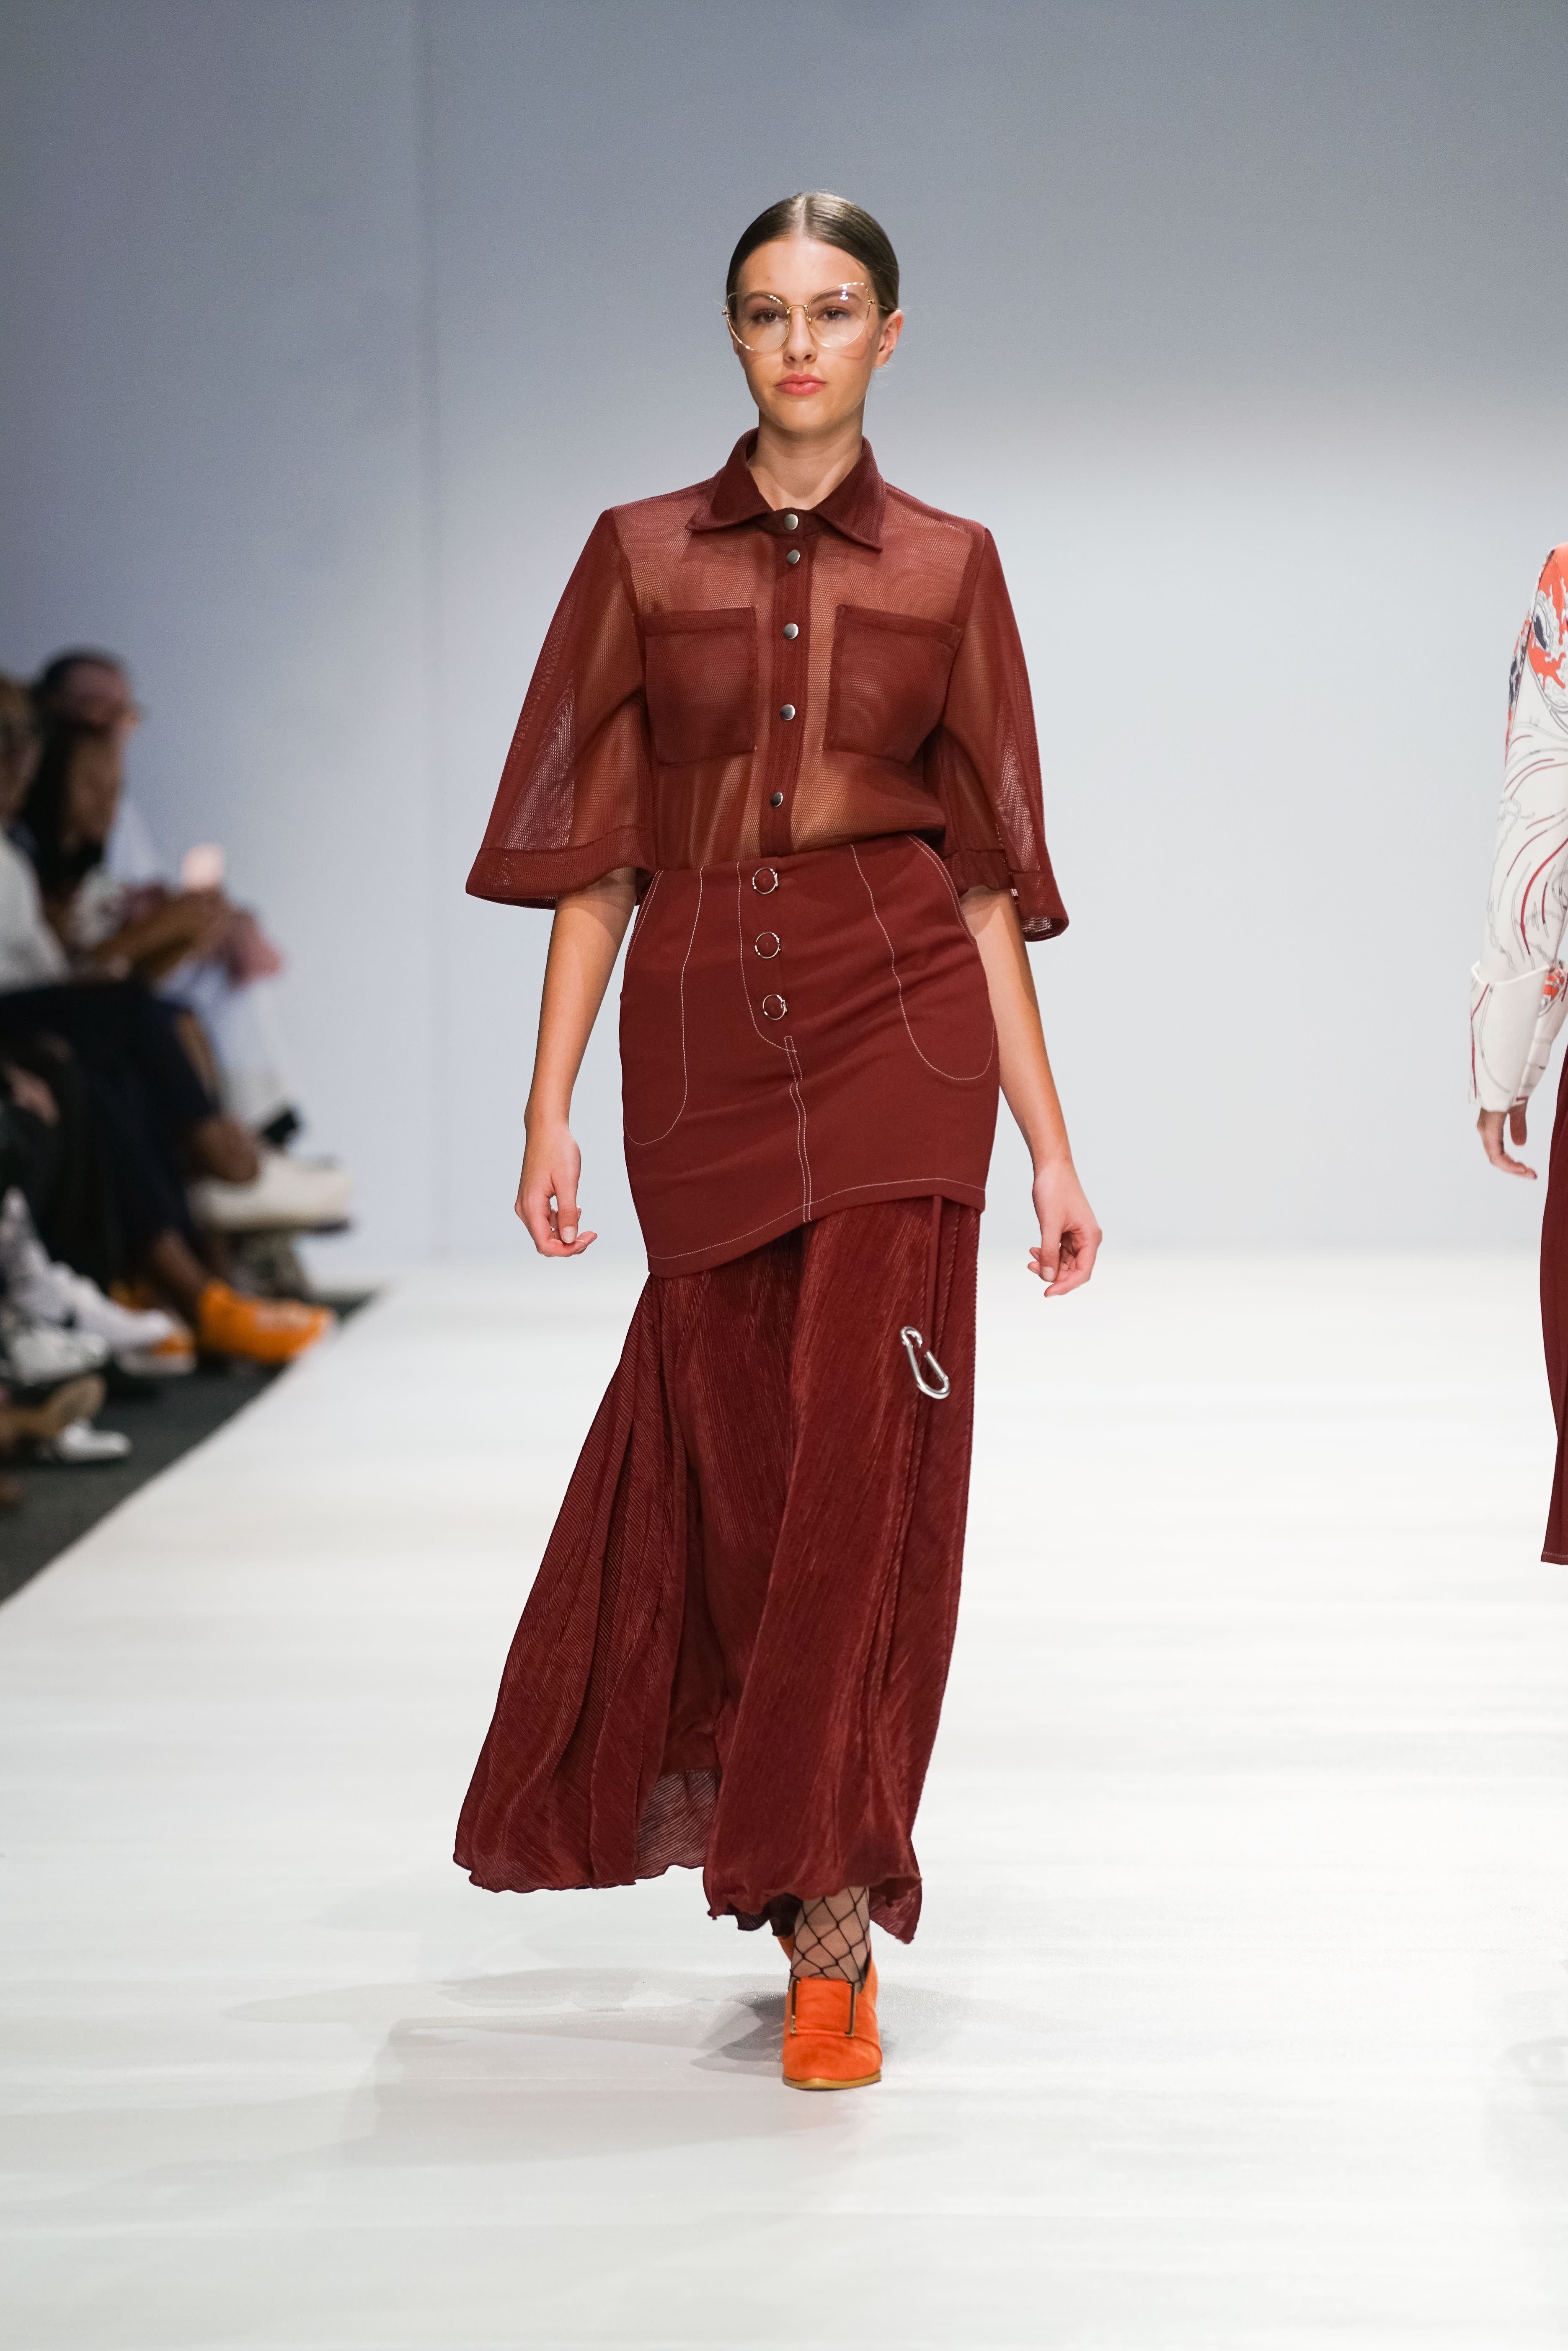 This Young Designer Stole the Show at South African Fashion Week
